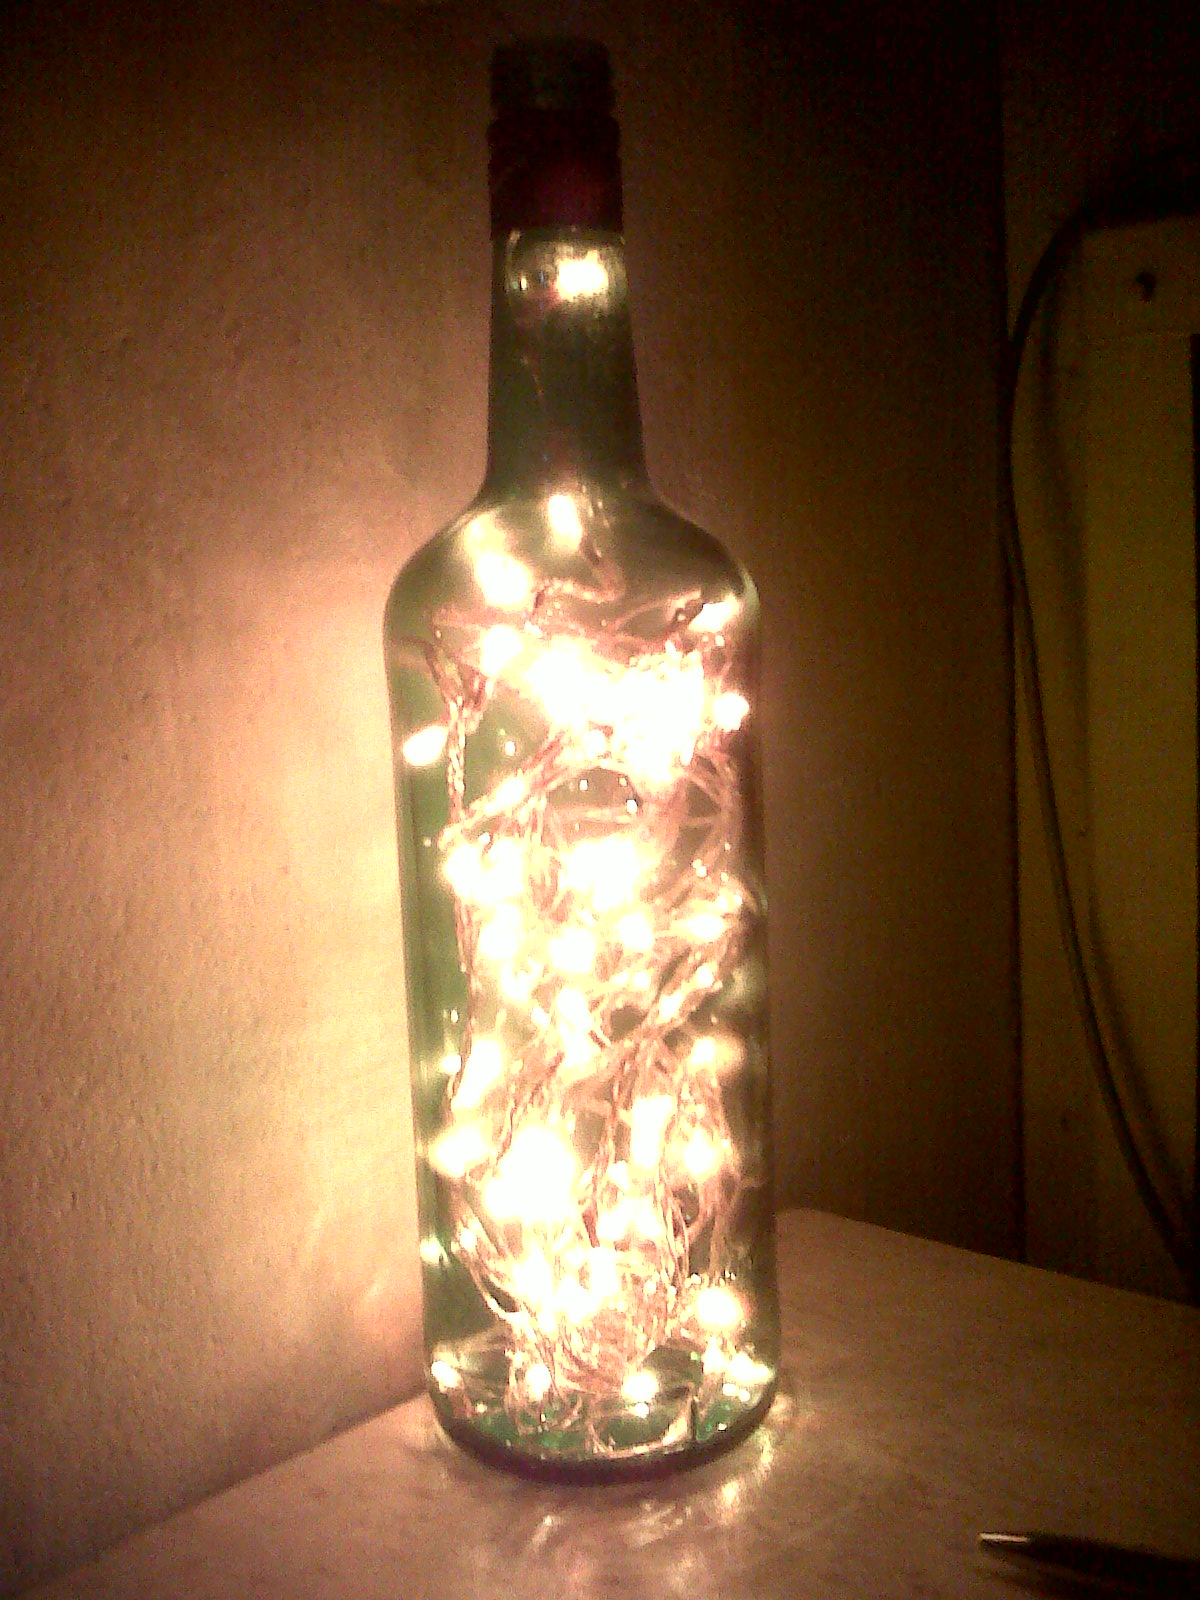 Empty wine bottle is filled with a string of lit LED lights.